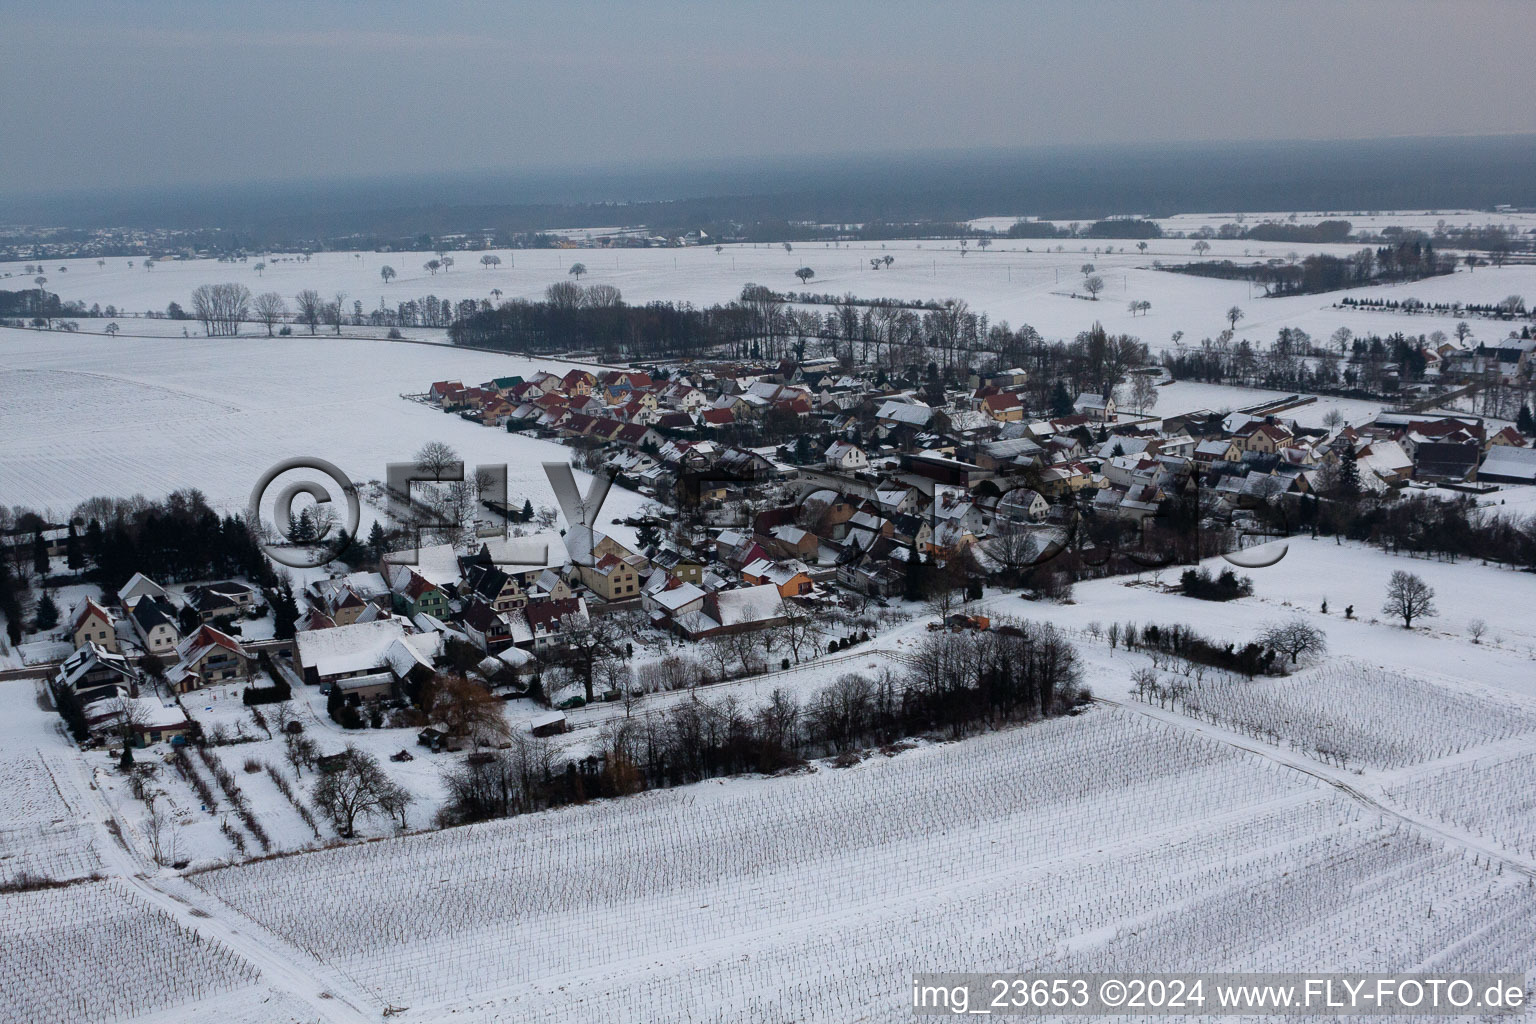 Bird's eye view of In the snow in winter in the district Kleinsteinfeld in Niederotterbach in the state Rhineland-Palatinate, Germany